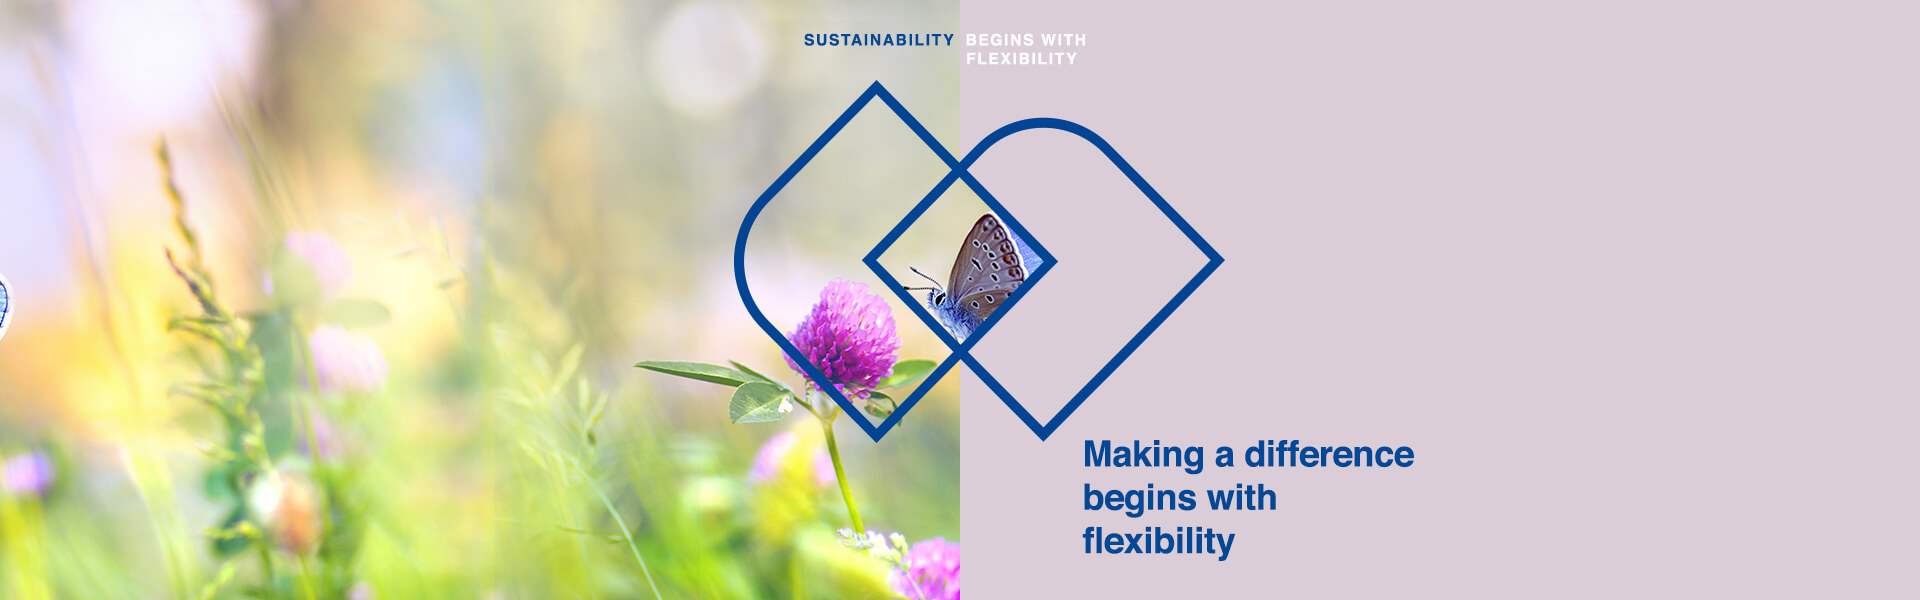 Sustainability begins with flexibility